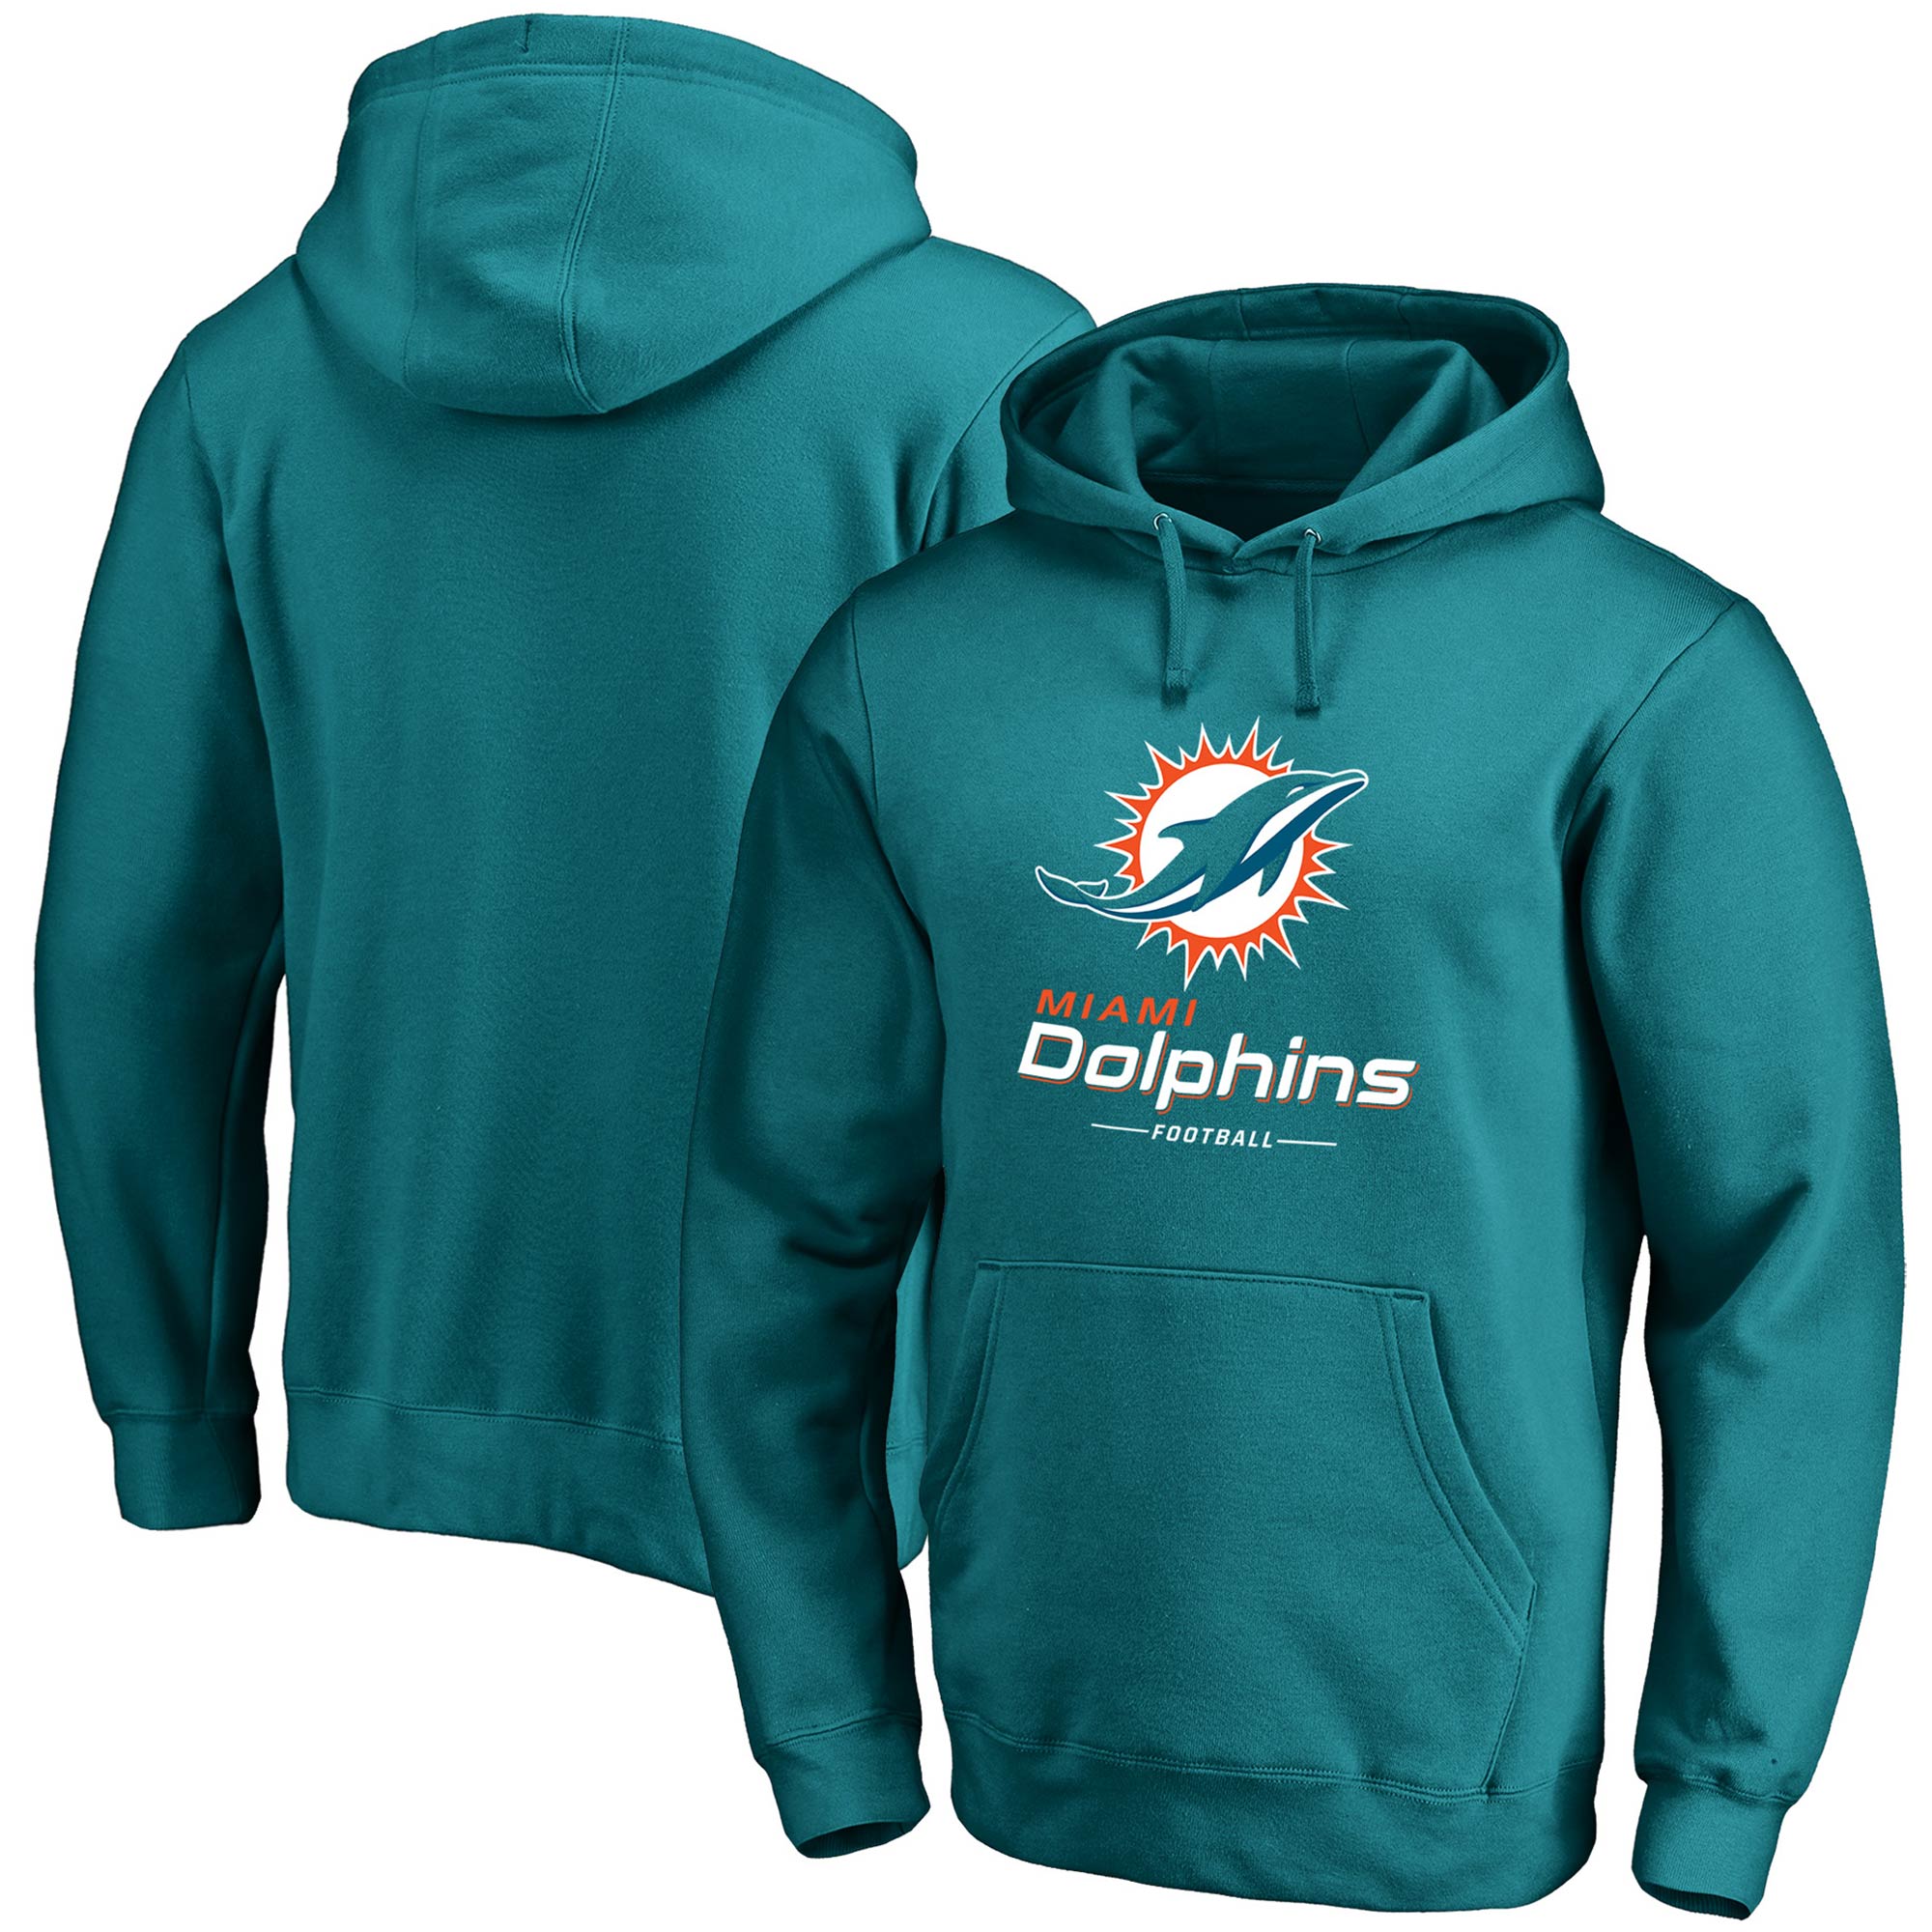 Wear by Erin Andrews Heathered Gray Miami Dolphins Team Full-Zip Hoodie